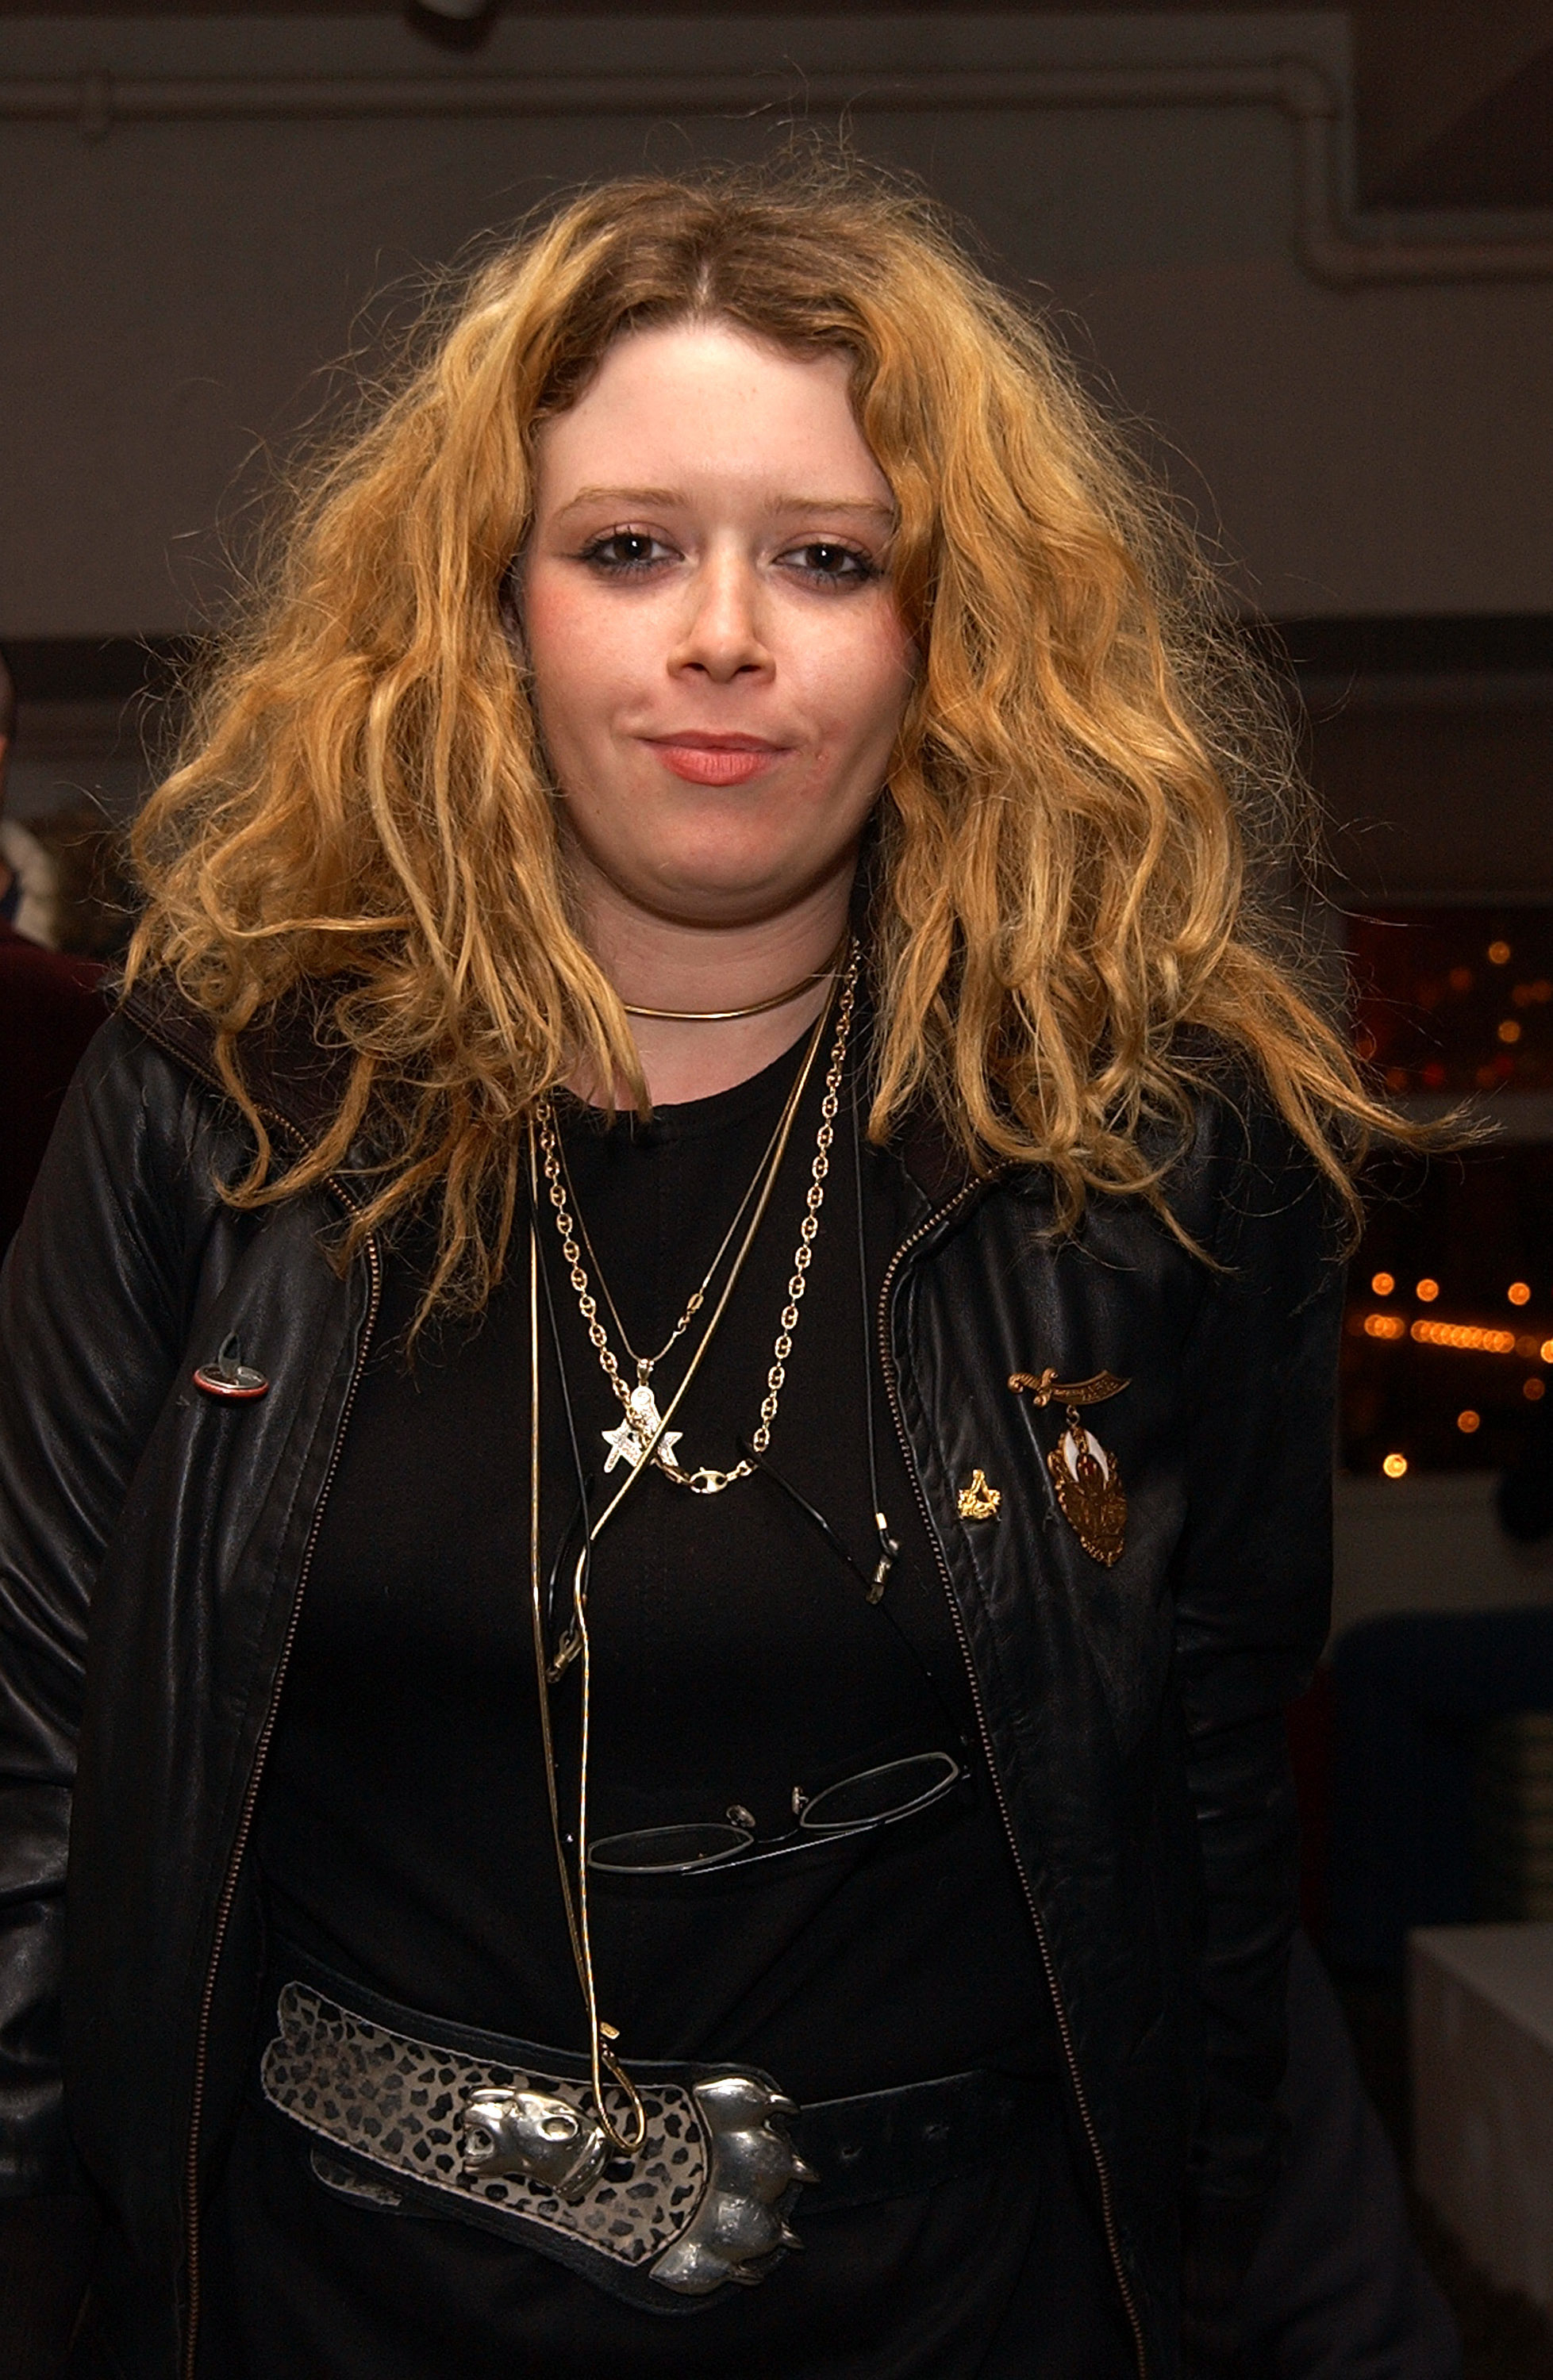 A young Natasha Lyonne is wearing a leather jacket, layered necklaces, and a wide belt